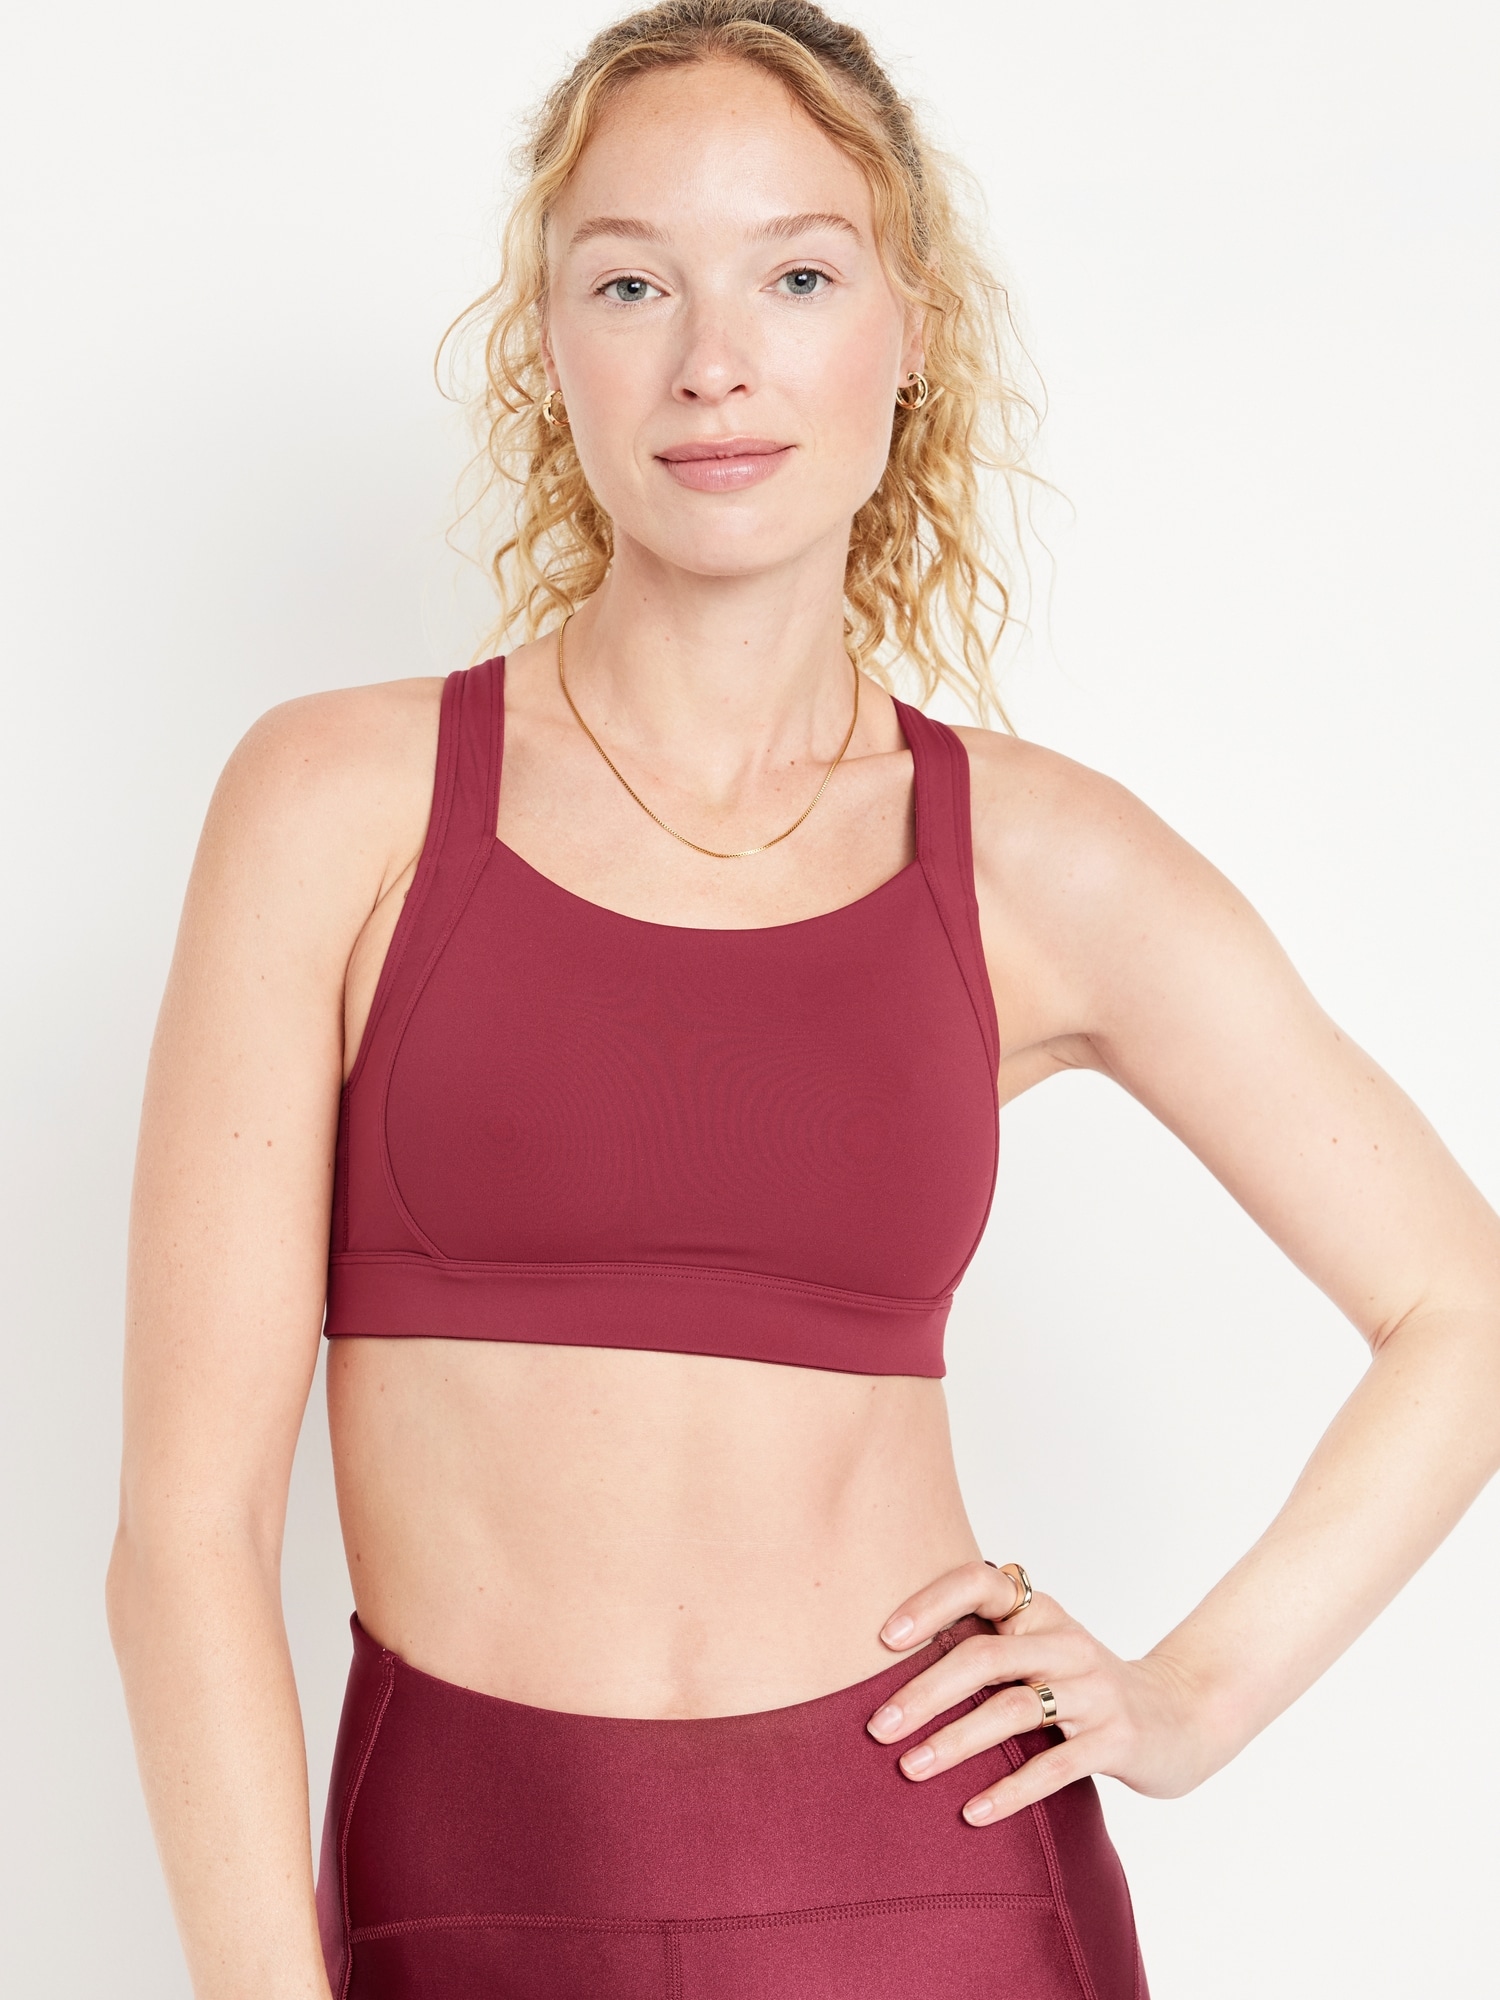 Old Navy High Support PowerSoft Convertible Sports Bra for Women